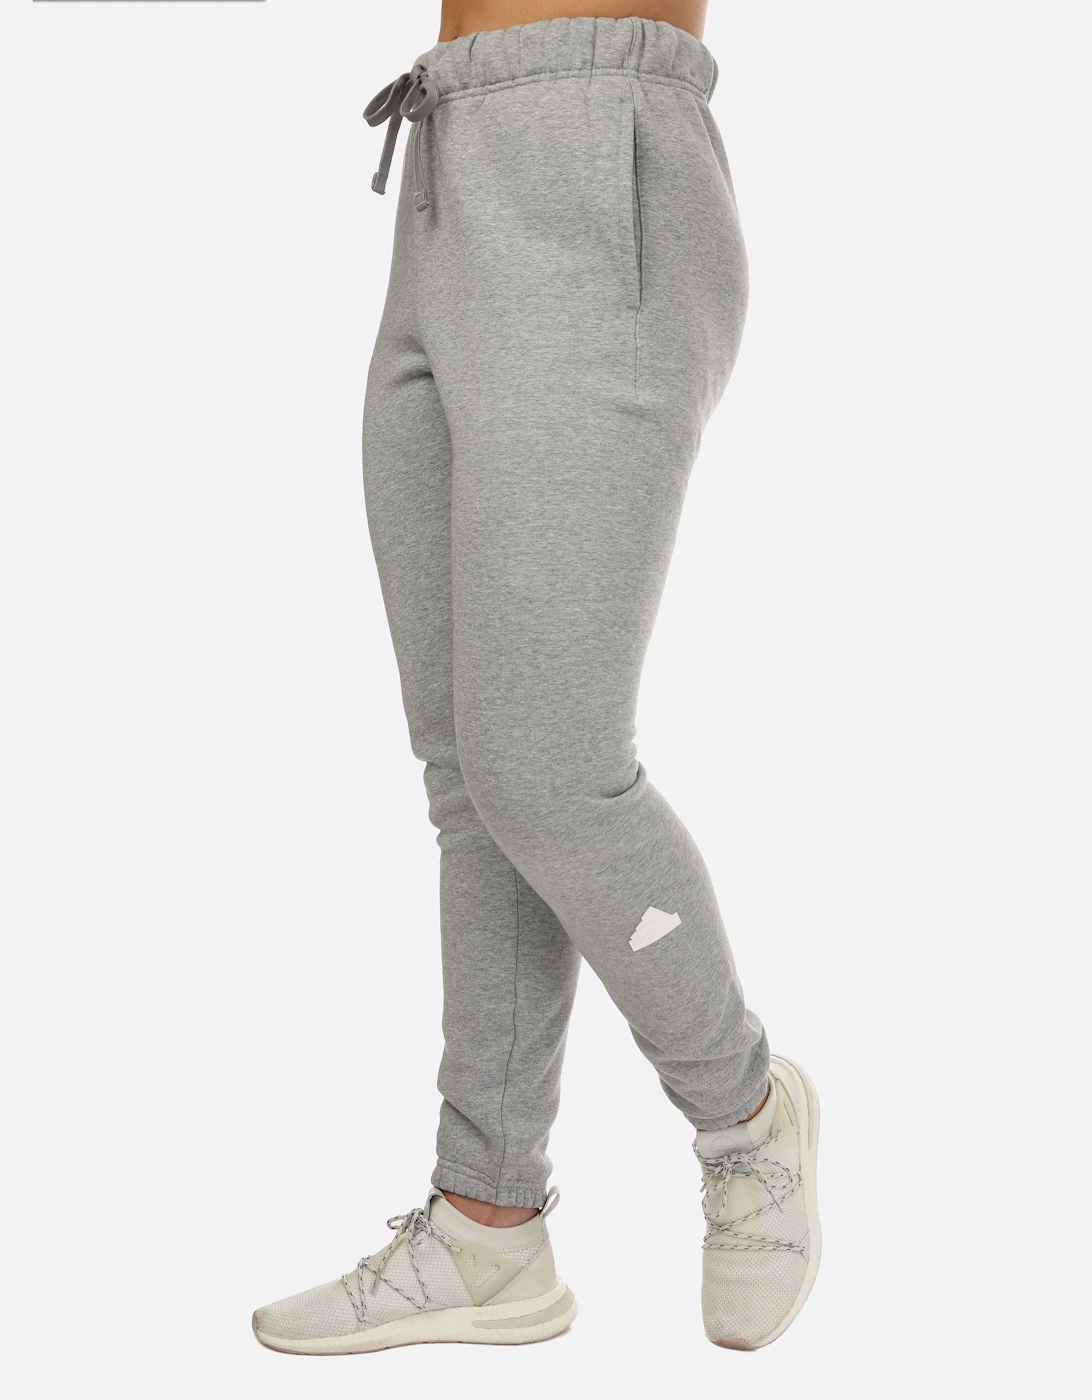 Adidas Women's Womens Joggers - Grey - Size: 12/14/32in